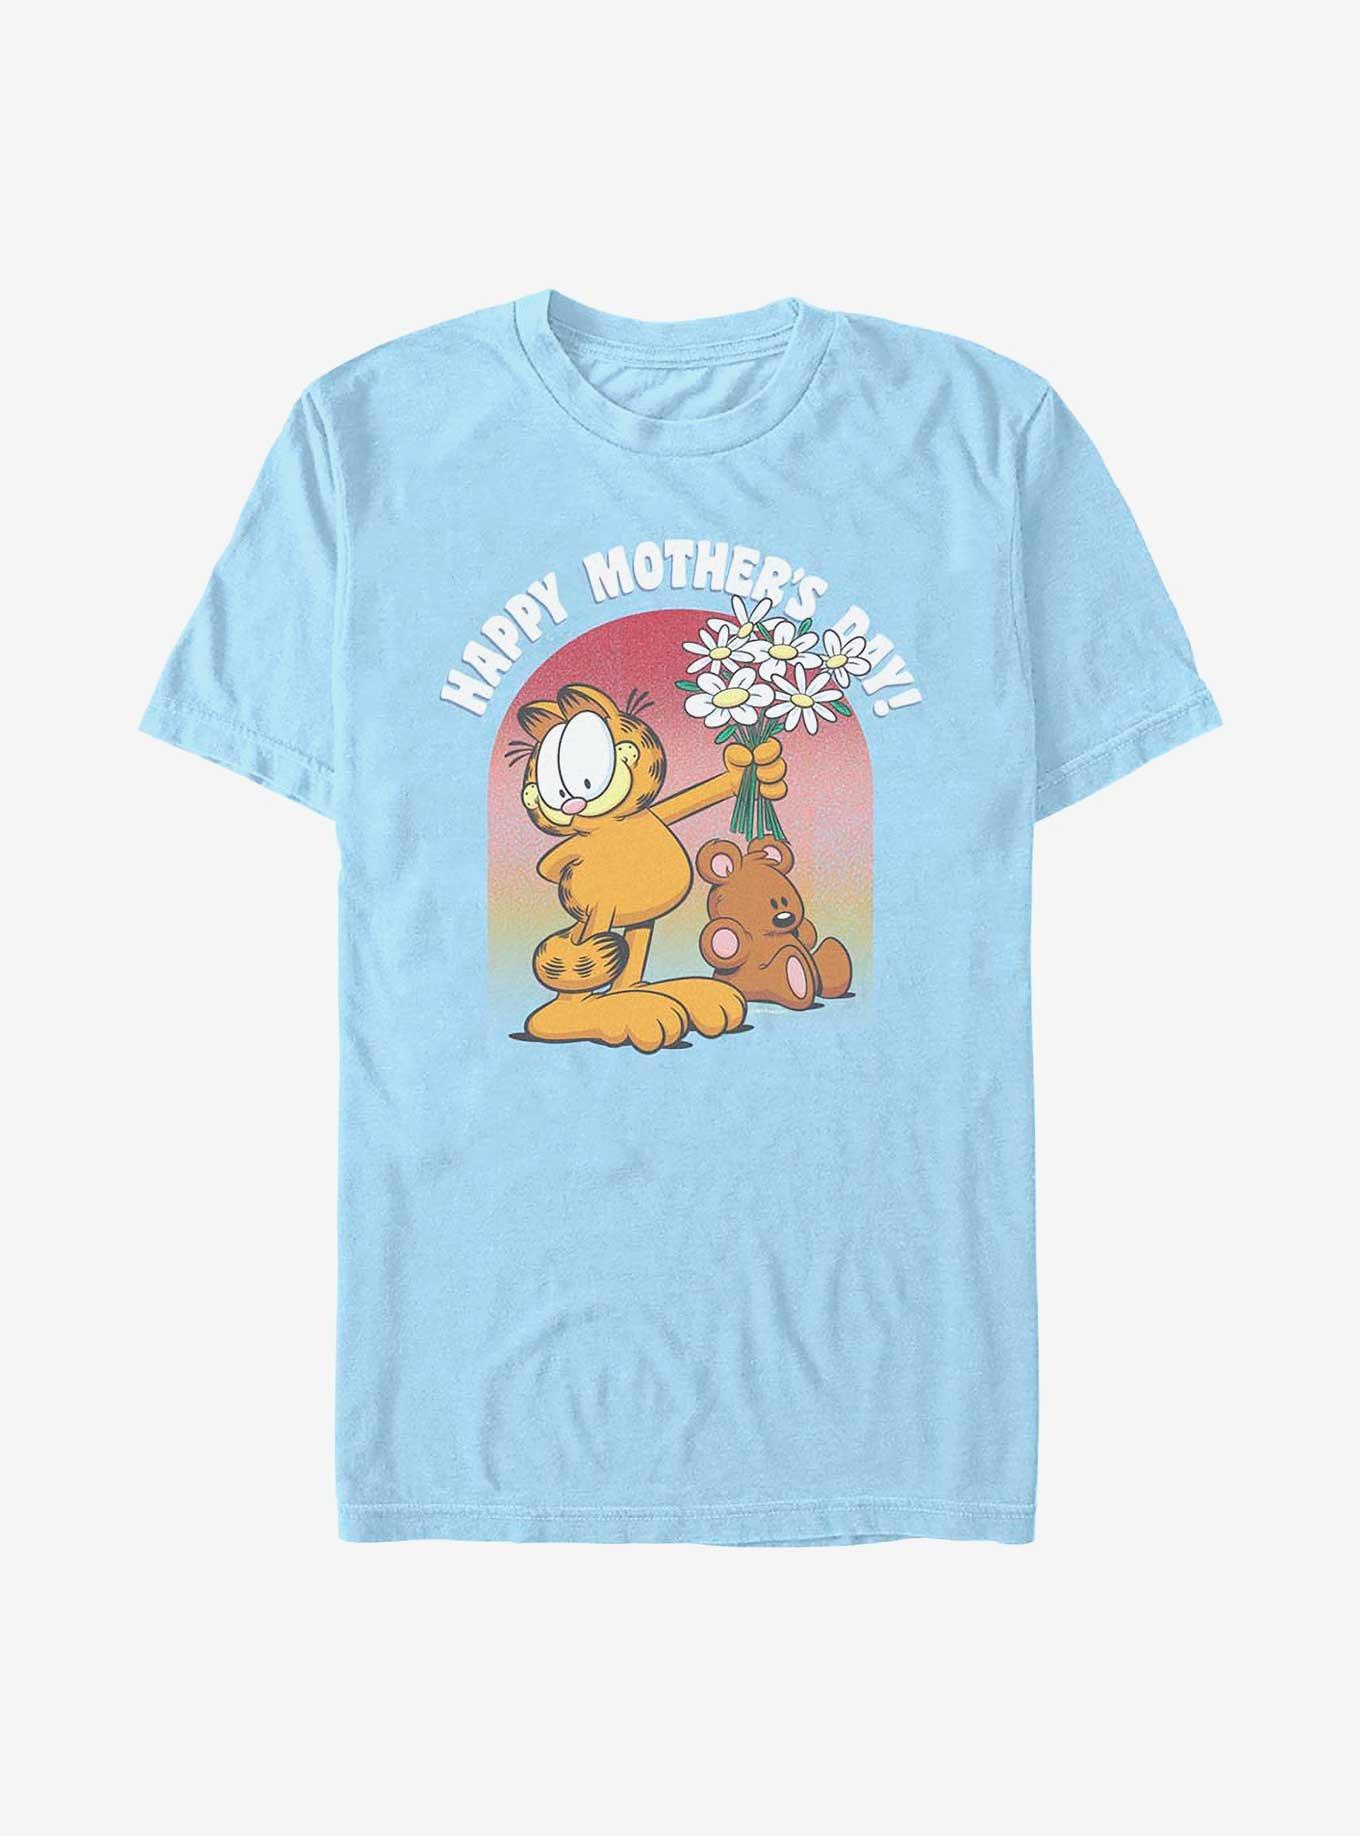 Garfield & Pooky Mom's Day T-Shirt, , hi-res